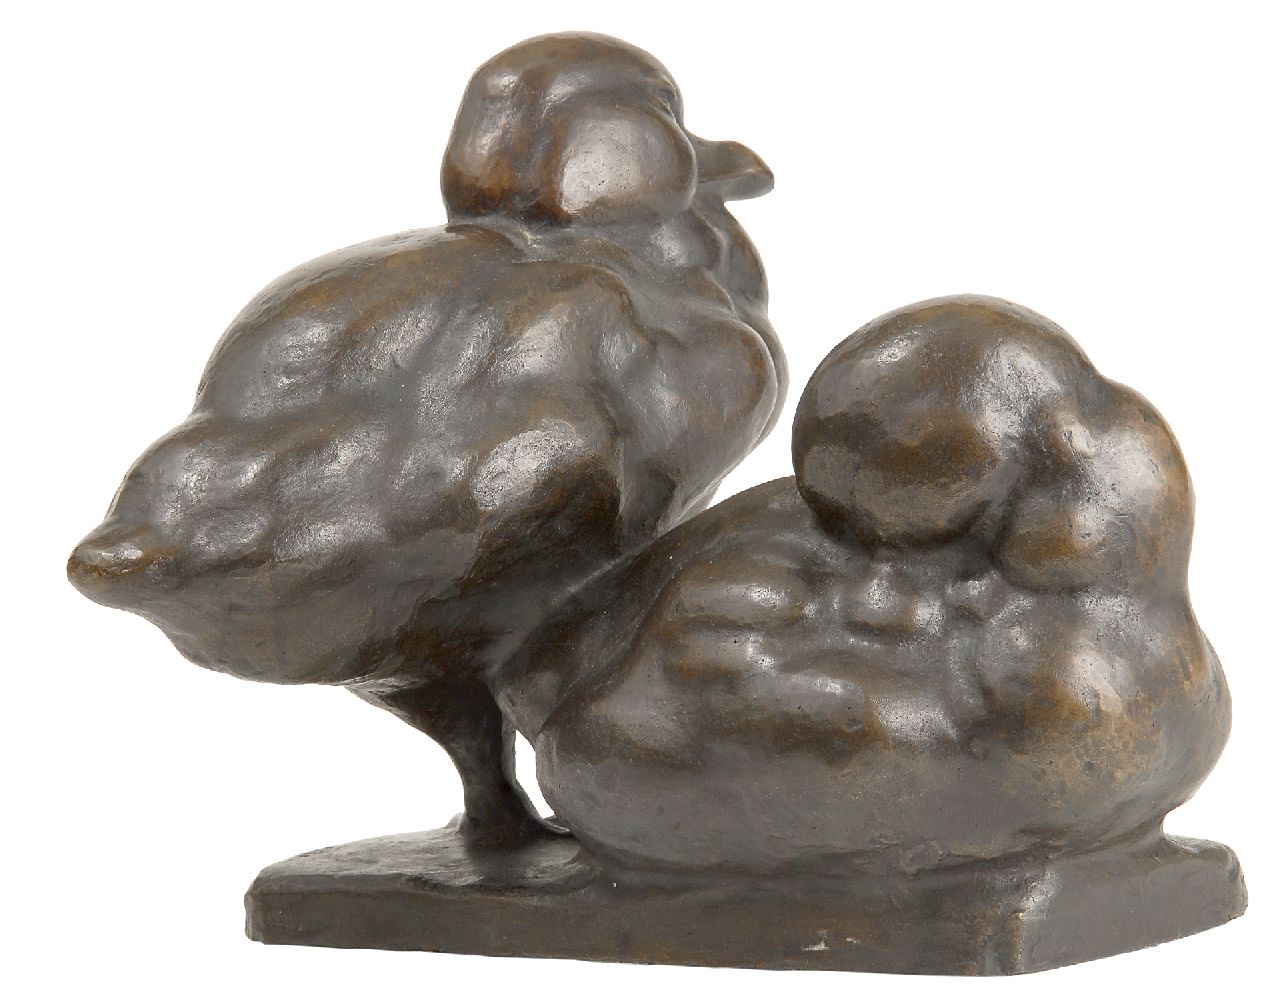 Gaul A.  | August Gaul, Two little swans, bronze 22.7 x 27.0 cm, signed on the base